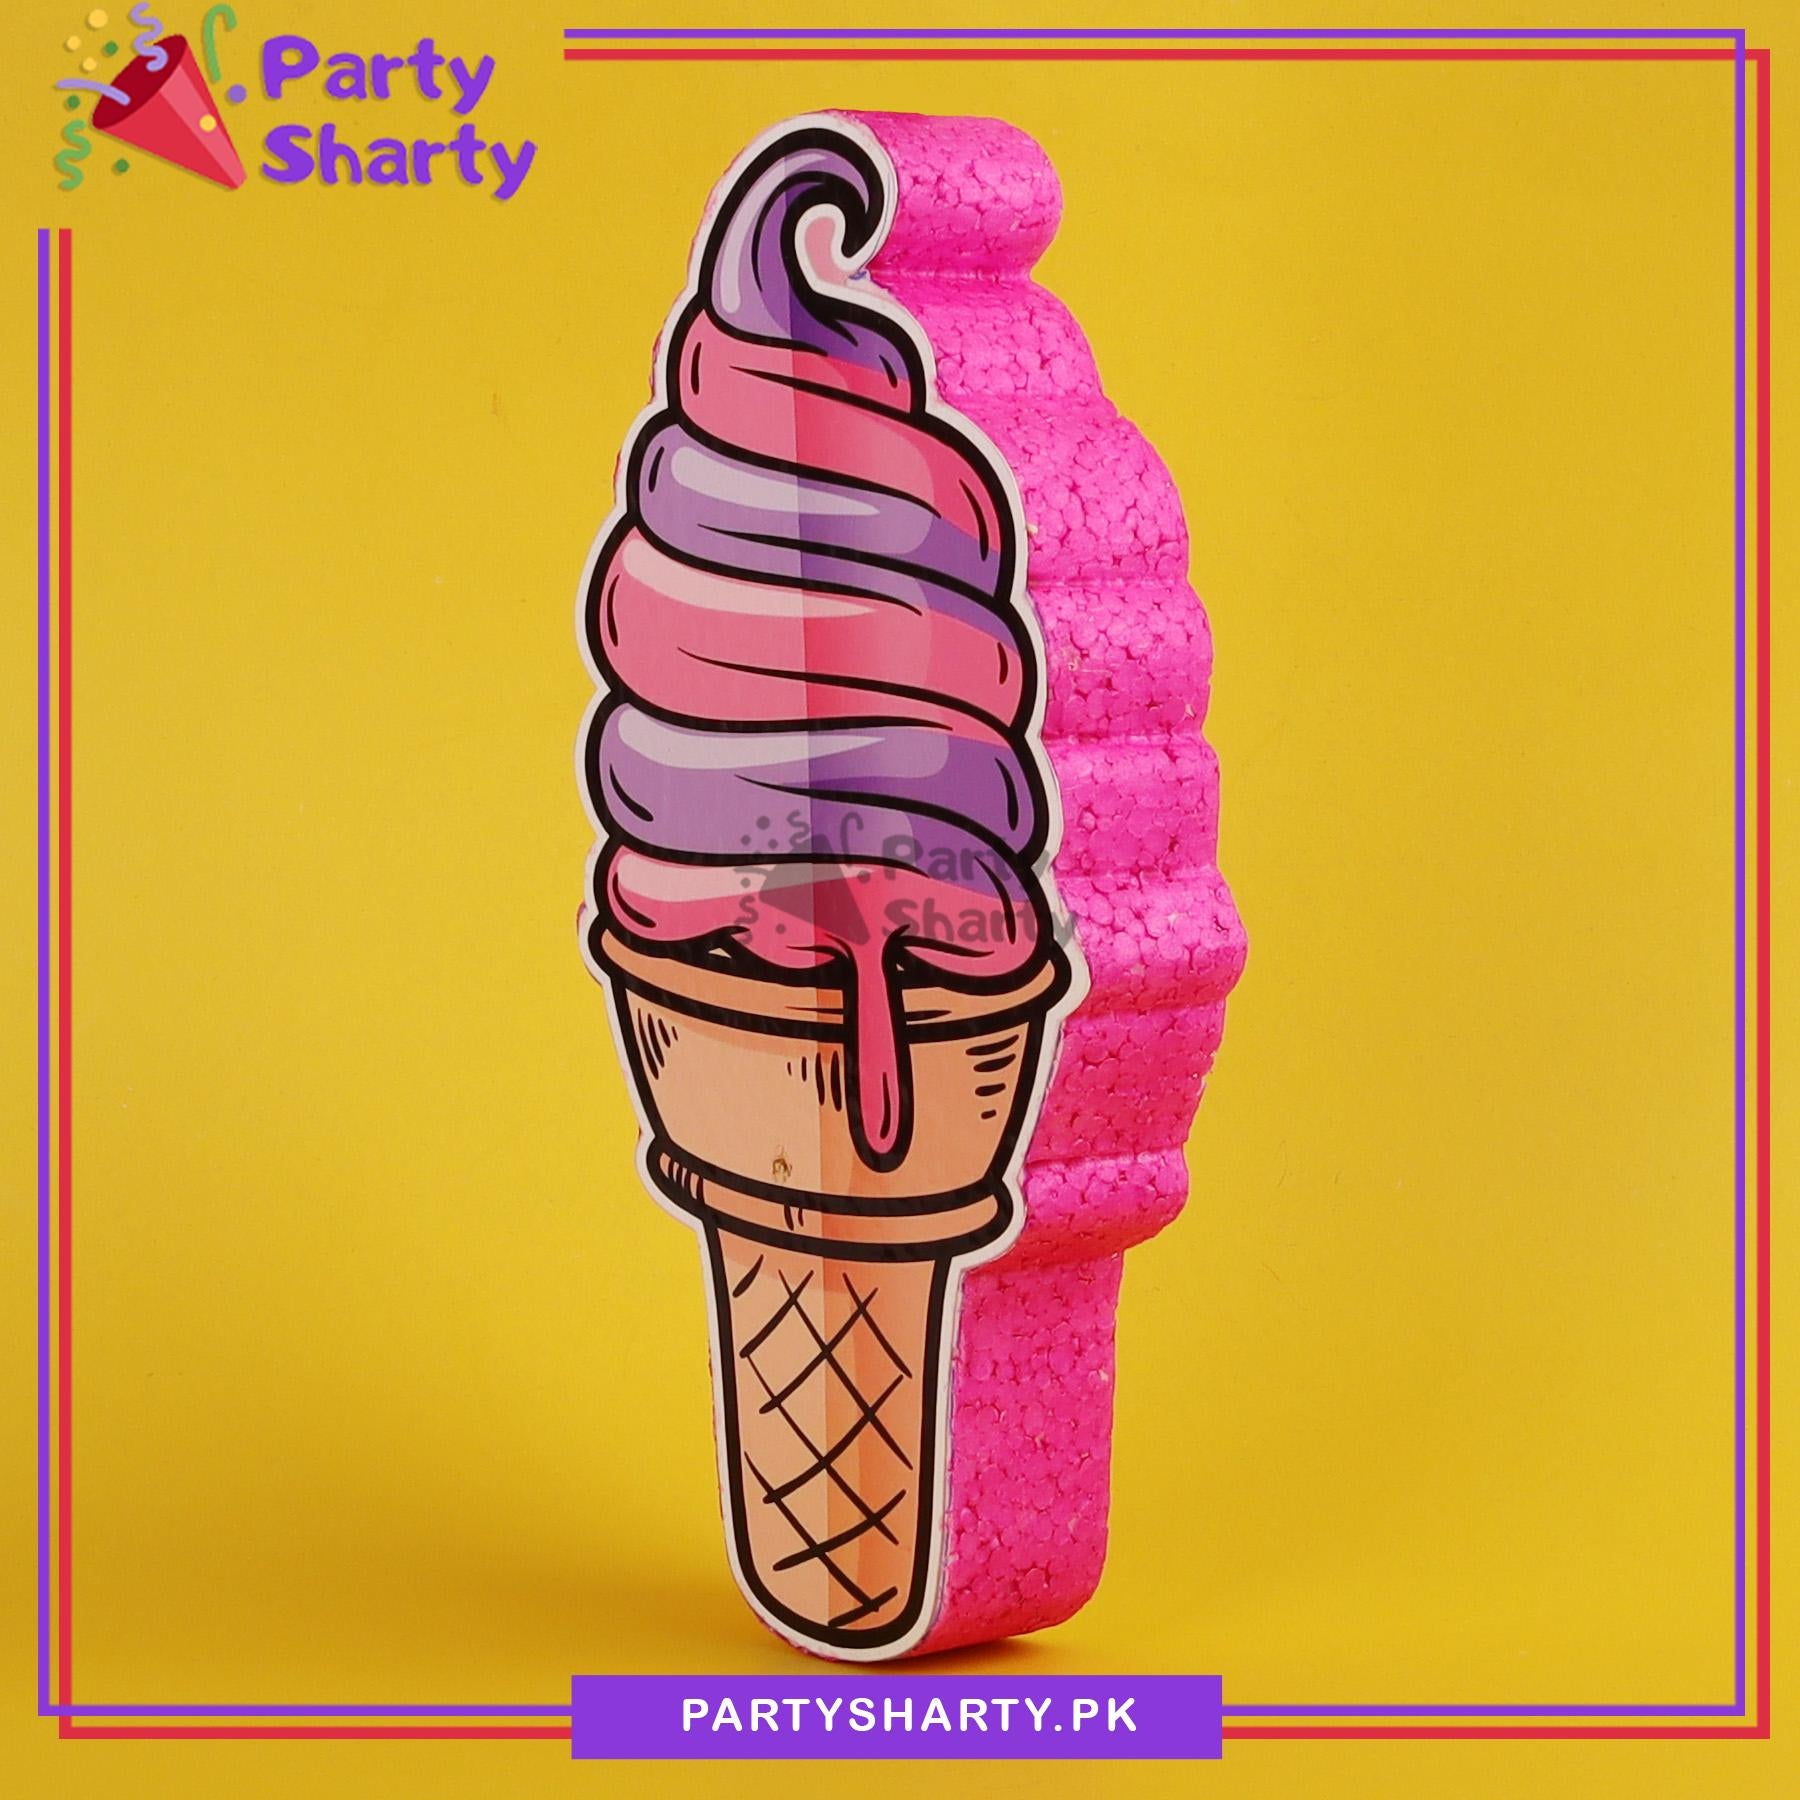 Ice-cream Cone Thermocol Standee For Candyland Theme Based Birthday Celebration and Party Decoration